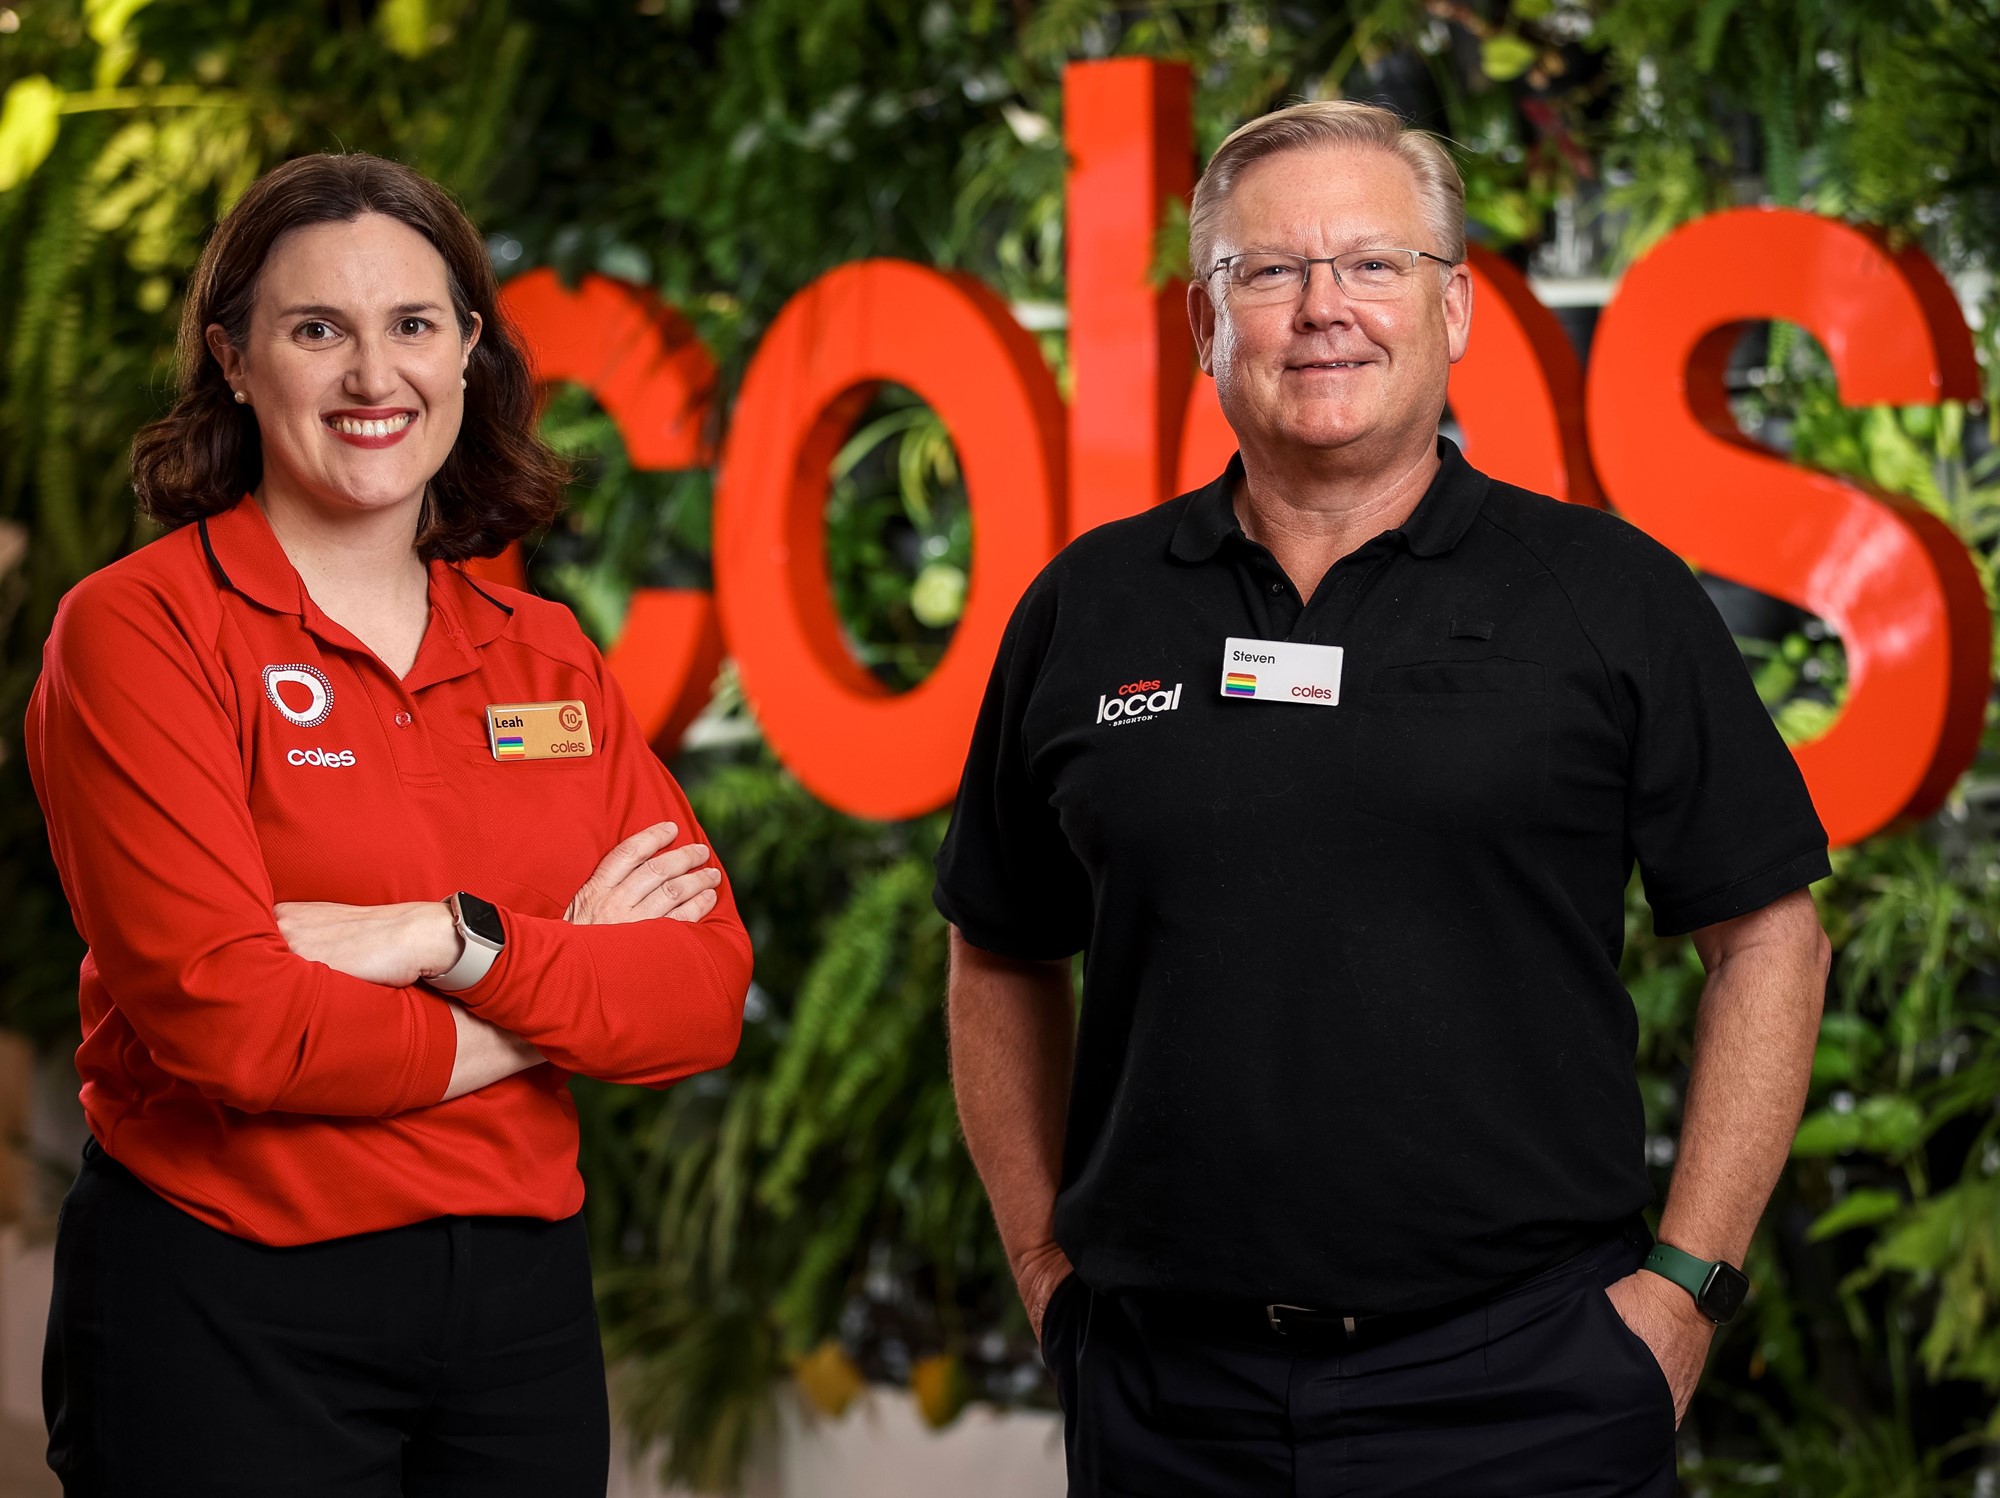 Coles incoming ceo Leah Weckert stands next to retiring ceo Steven Cain